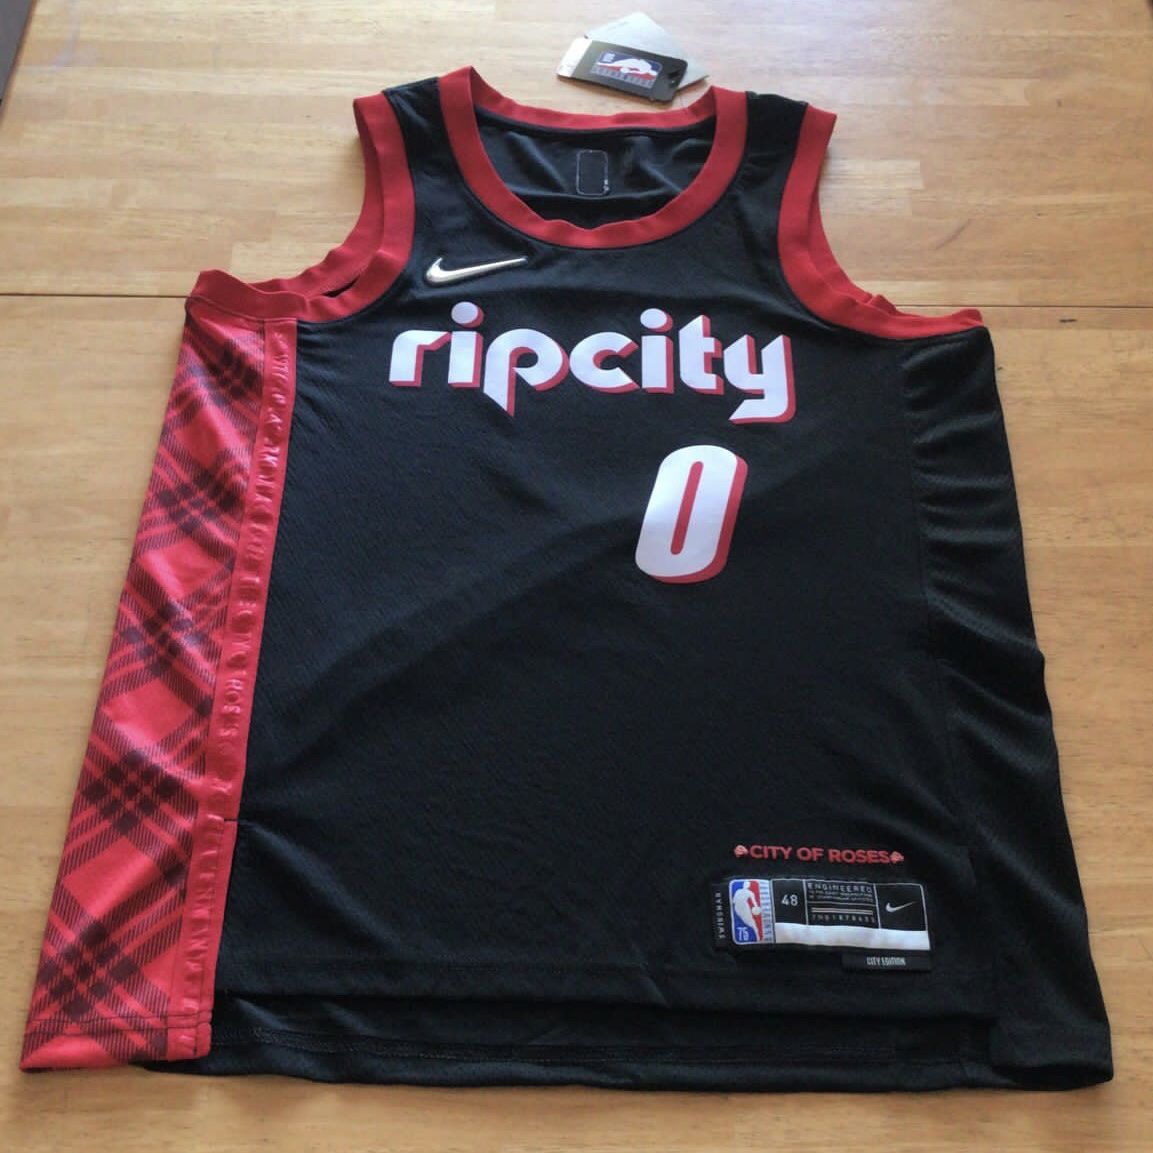 1 of 10 Lillard Home Jersey came in the mail today. : r/ripcity